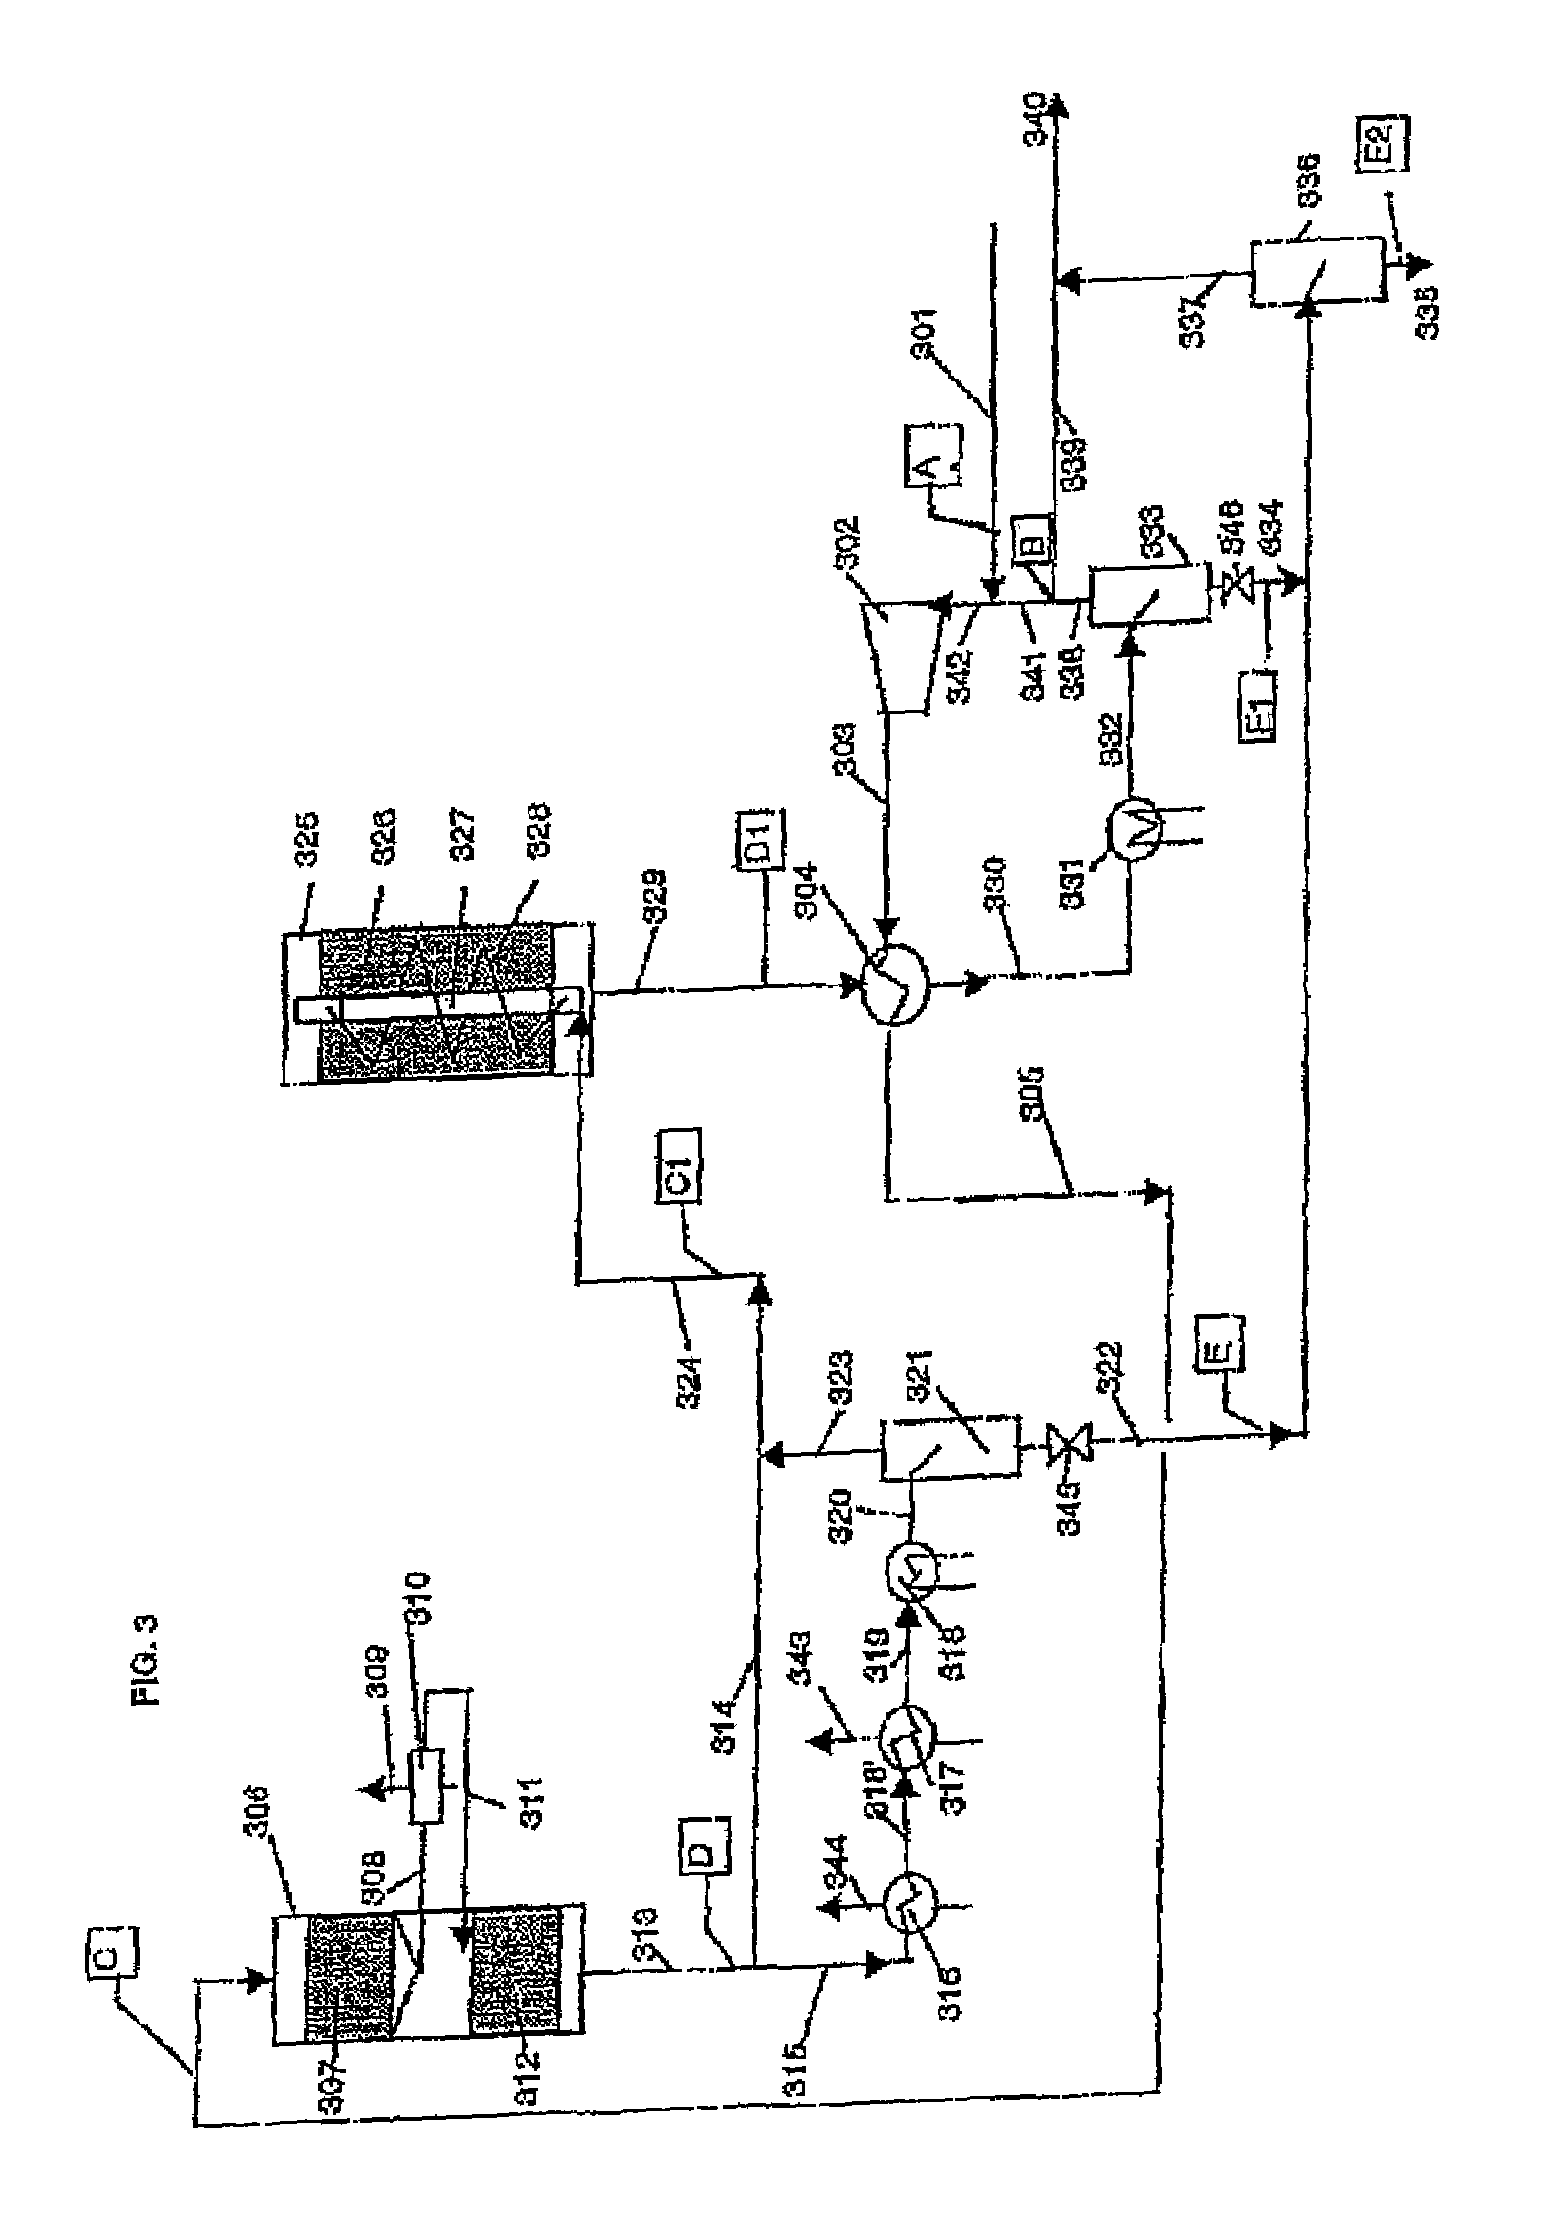 Method for carrying out heterogeneous catalytic exothermic gas phase reactions